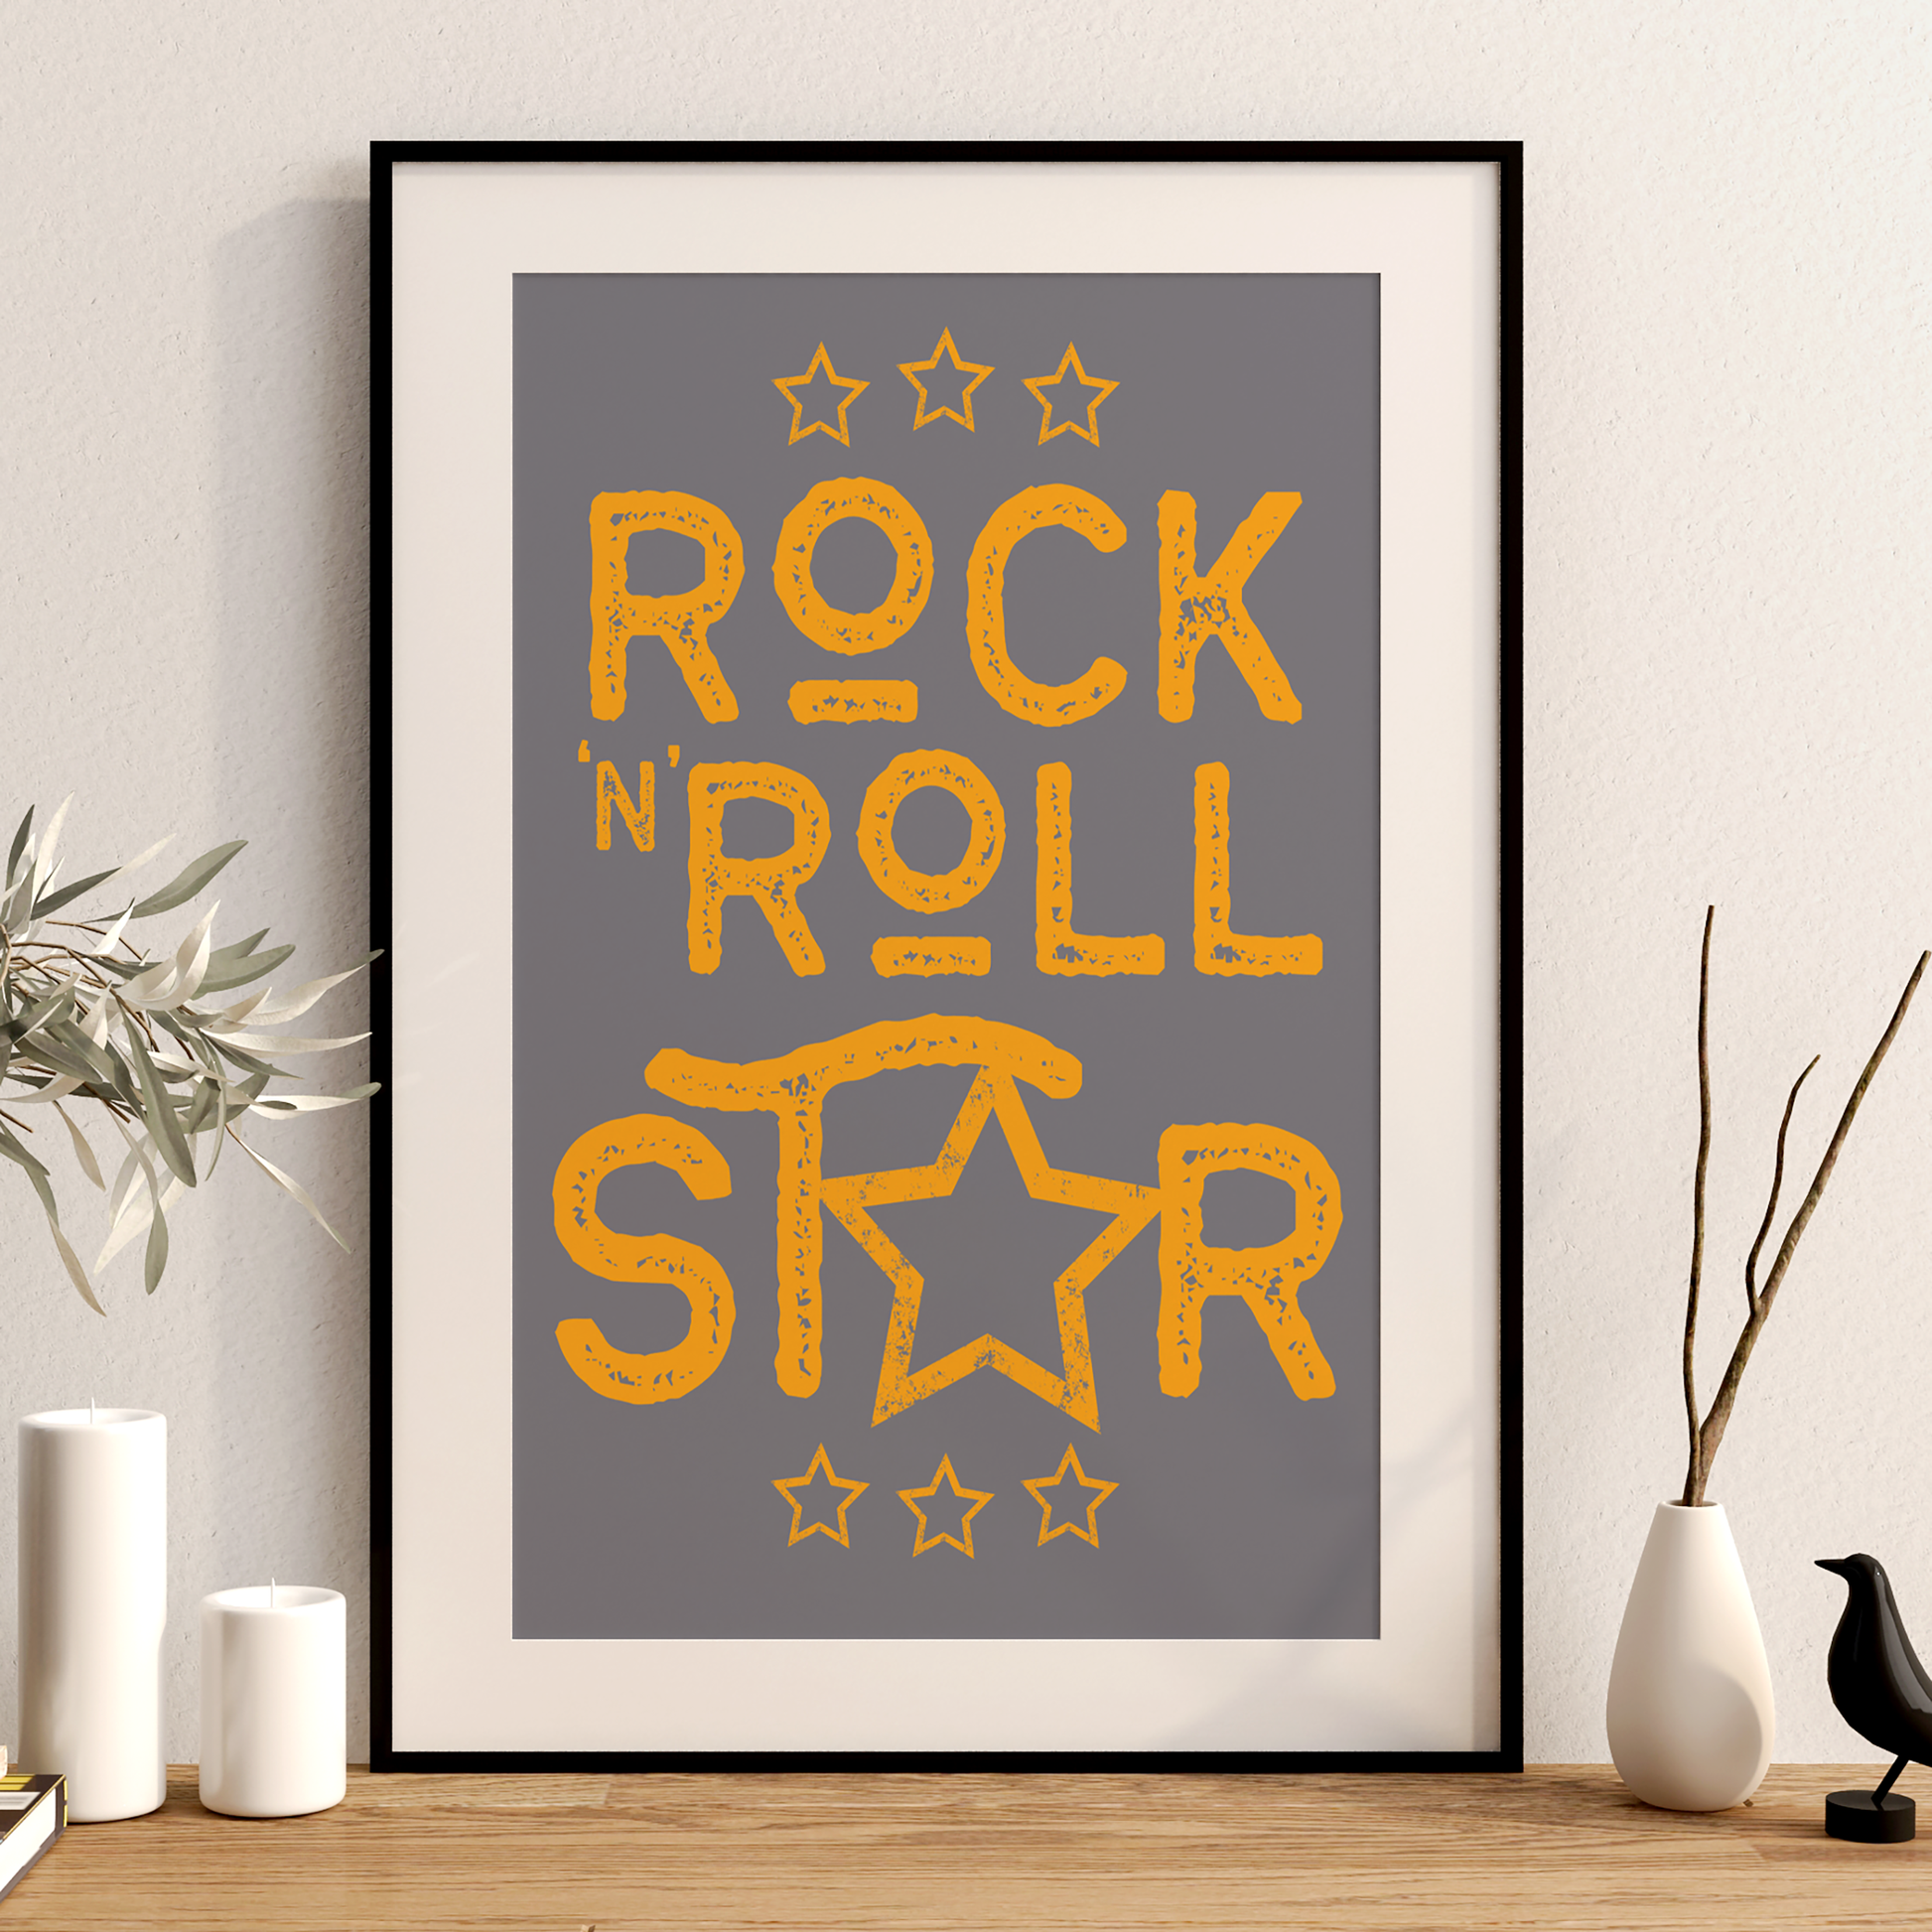 Oasis Wall Art Poster Print Rock and Roll Star